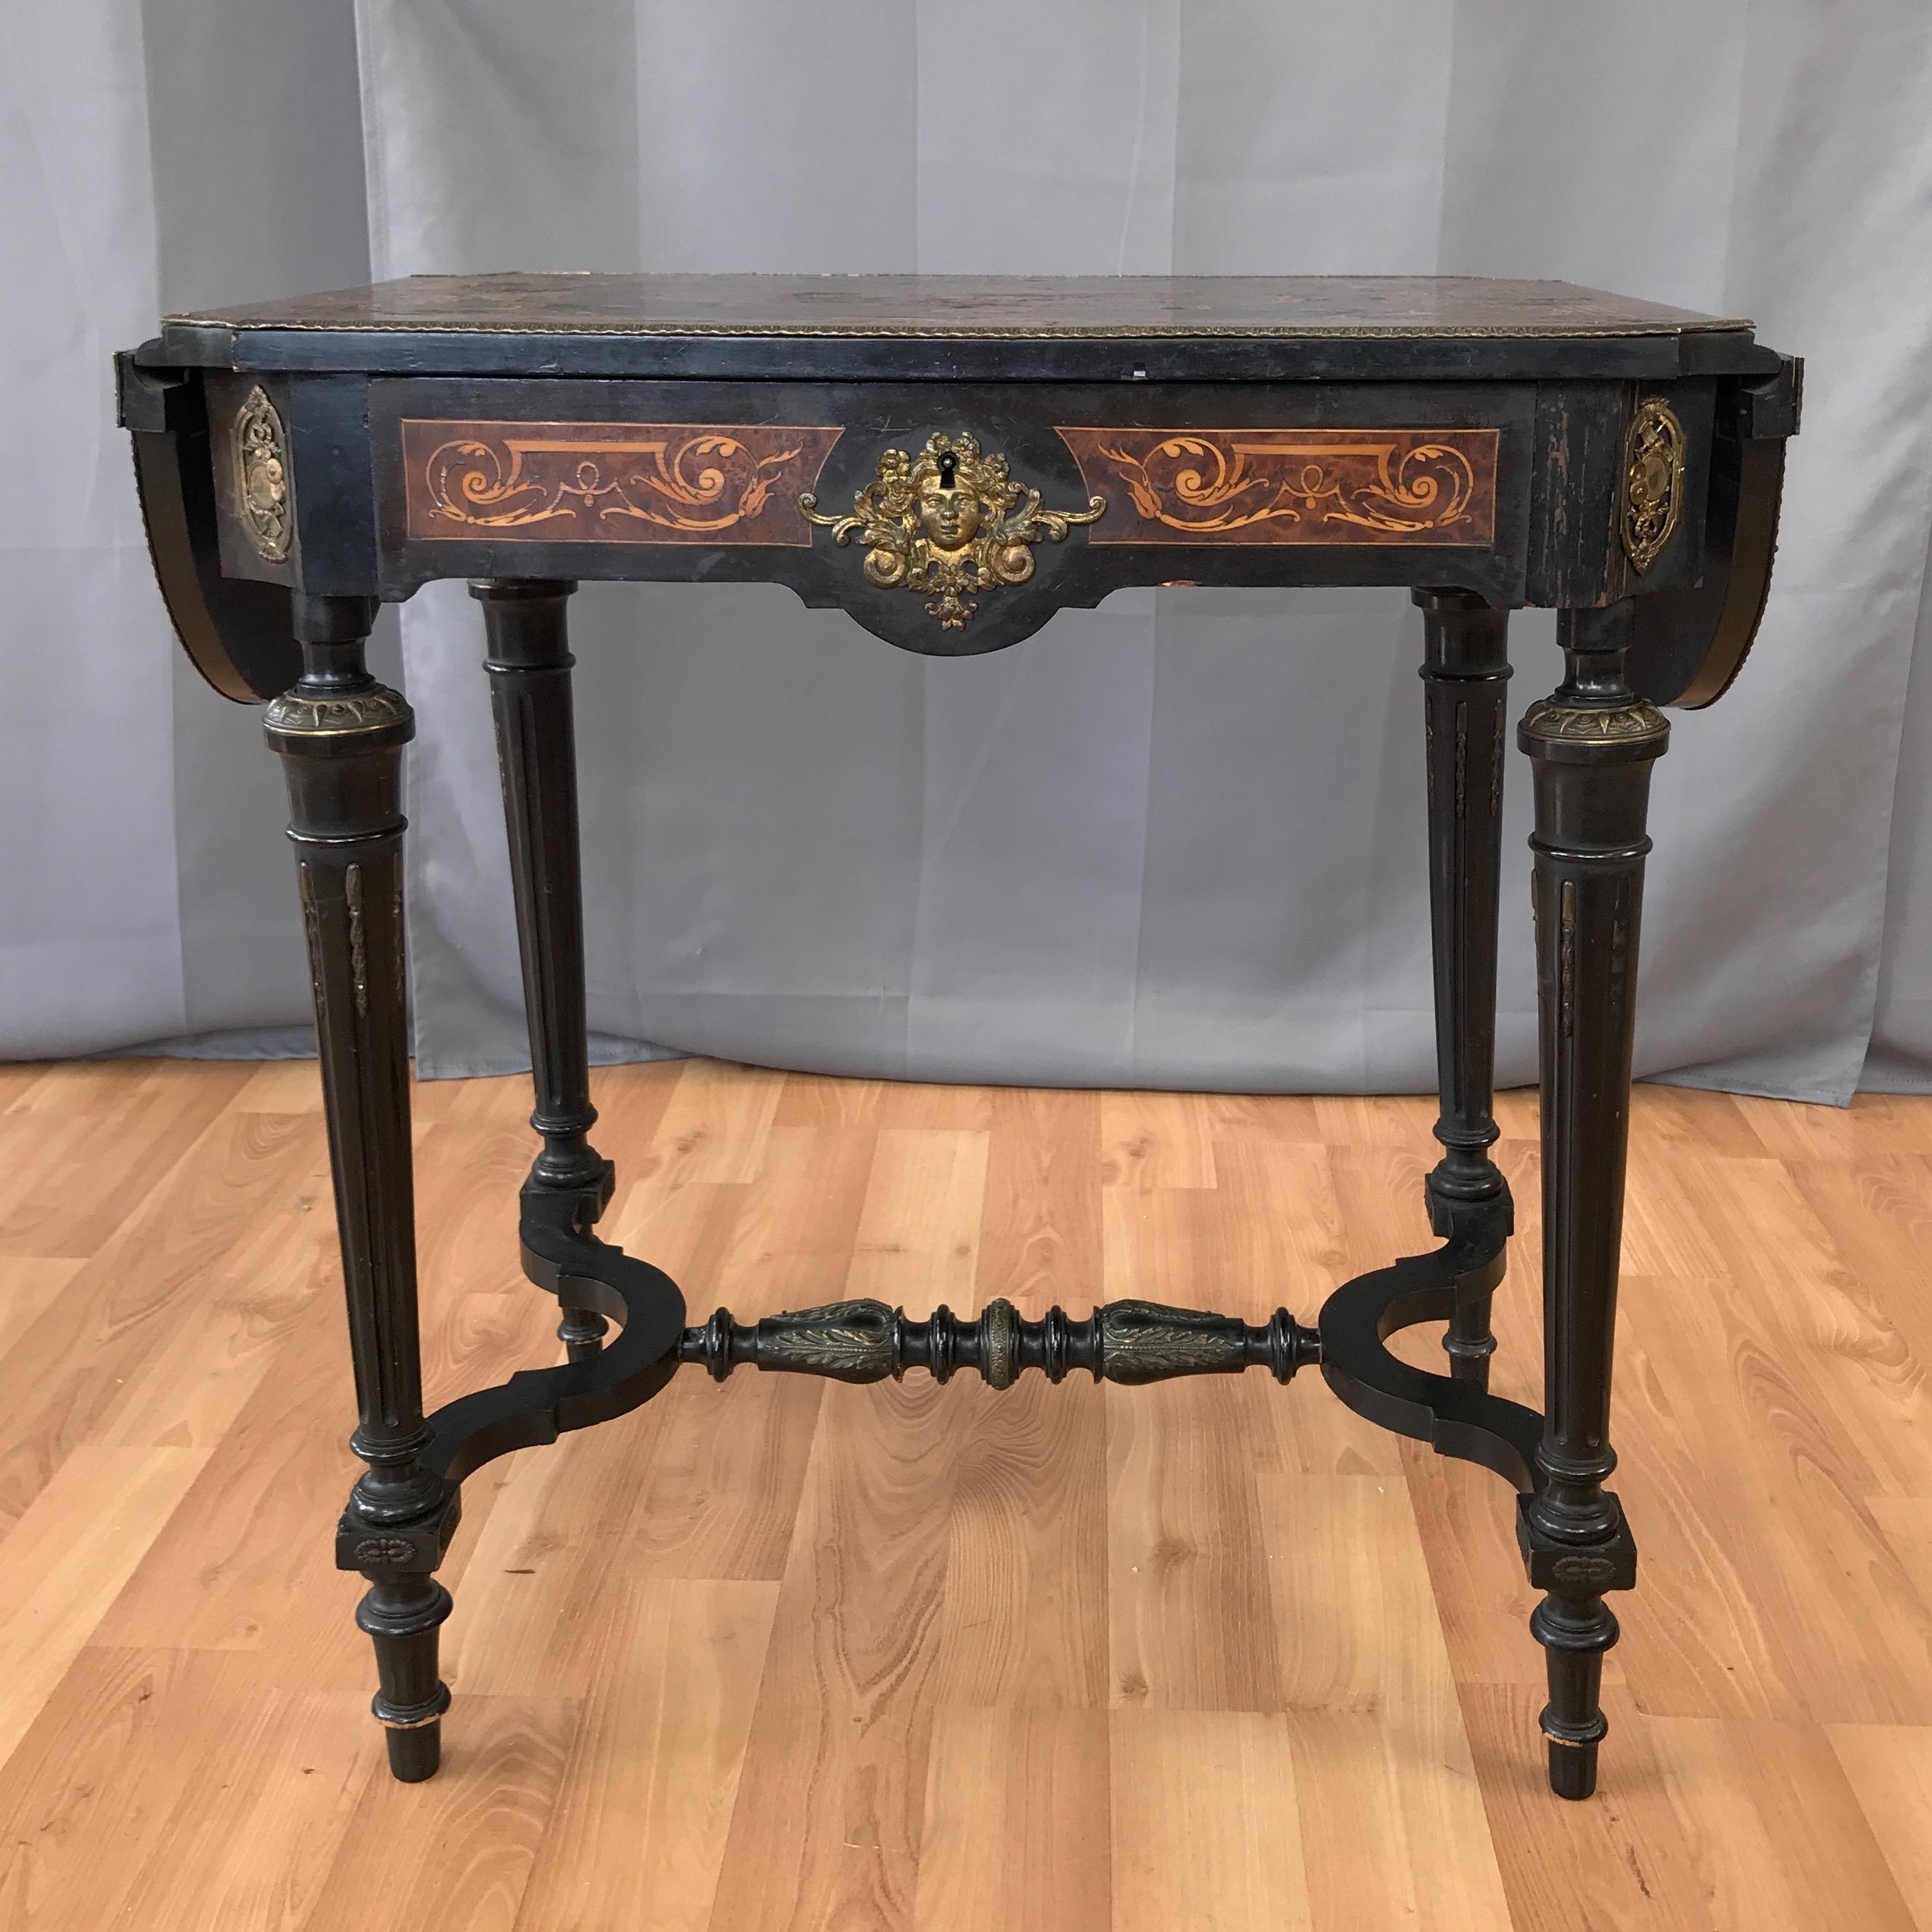 19th Century Napoleon III French Marquetry Drop-Leaf Salon or Writing Table with Drawer, 1860